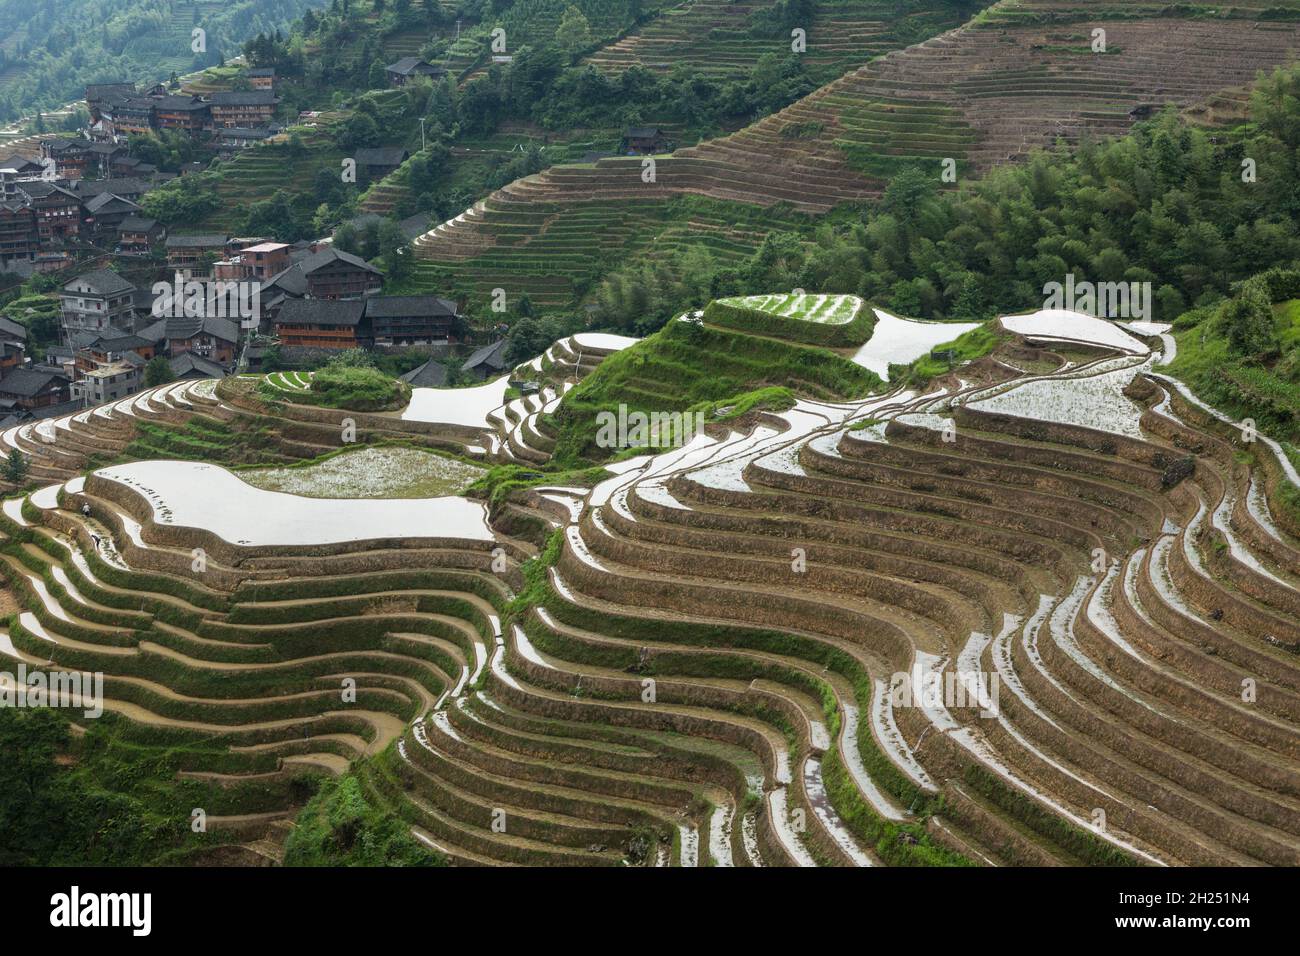 The village of Ping'an and the Ping'an terraces of the Longi rice terraces in Longshen, Guanxi, China. Stock Photo